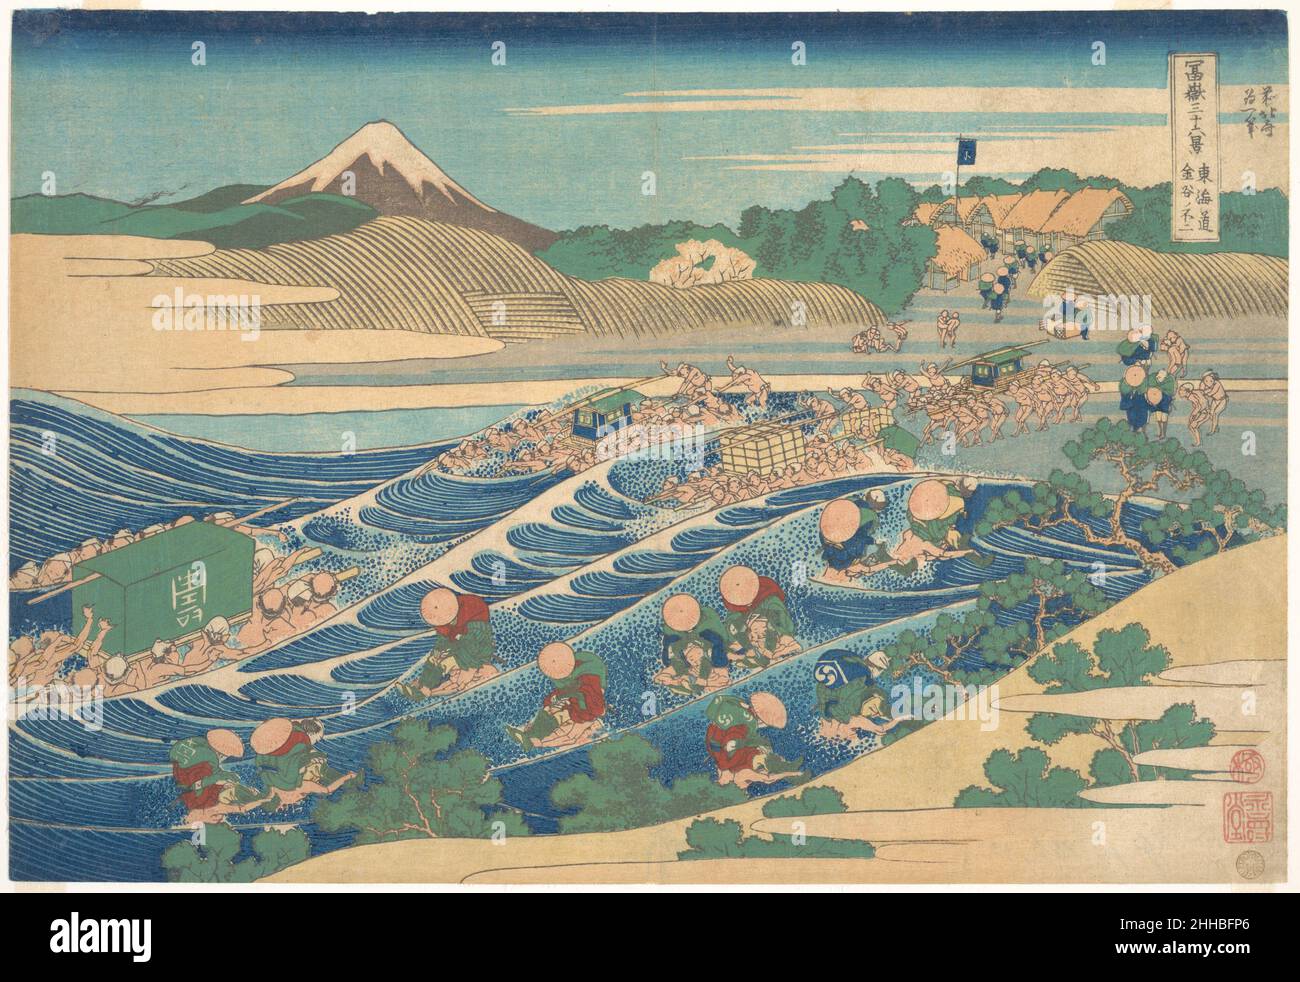 Fuji Seen from Kanaya on the Tōkaidō (Tōkaidō Kanaya no Fuji), from the series Thirty-six Views of Mount Fuji (Fugaku sanjūrokkei) ca. 1830–32 Katsushika Hokusai Japanese The vibrant, stylized design of this print, particularly the turbulent play of color and line used to compose the river and the travelers crossing it, threatens the integrity of the monochrome mountain beyond. The rhyming and analogizing of form and color that figure so prominently in Hokusai's style are virtually absent from this image of explosive color and line.. Fuji Seen from Kanaya on the Tōkaidō (Tōkaidō Kanaya no Fuji Stock Photo